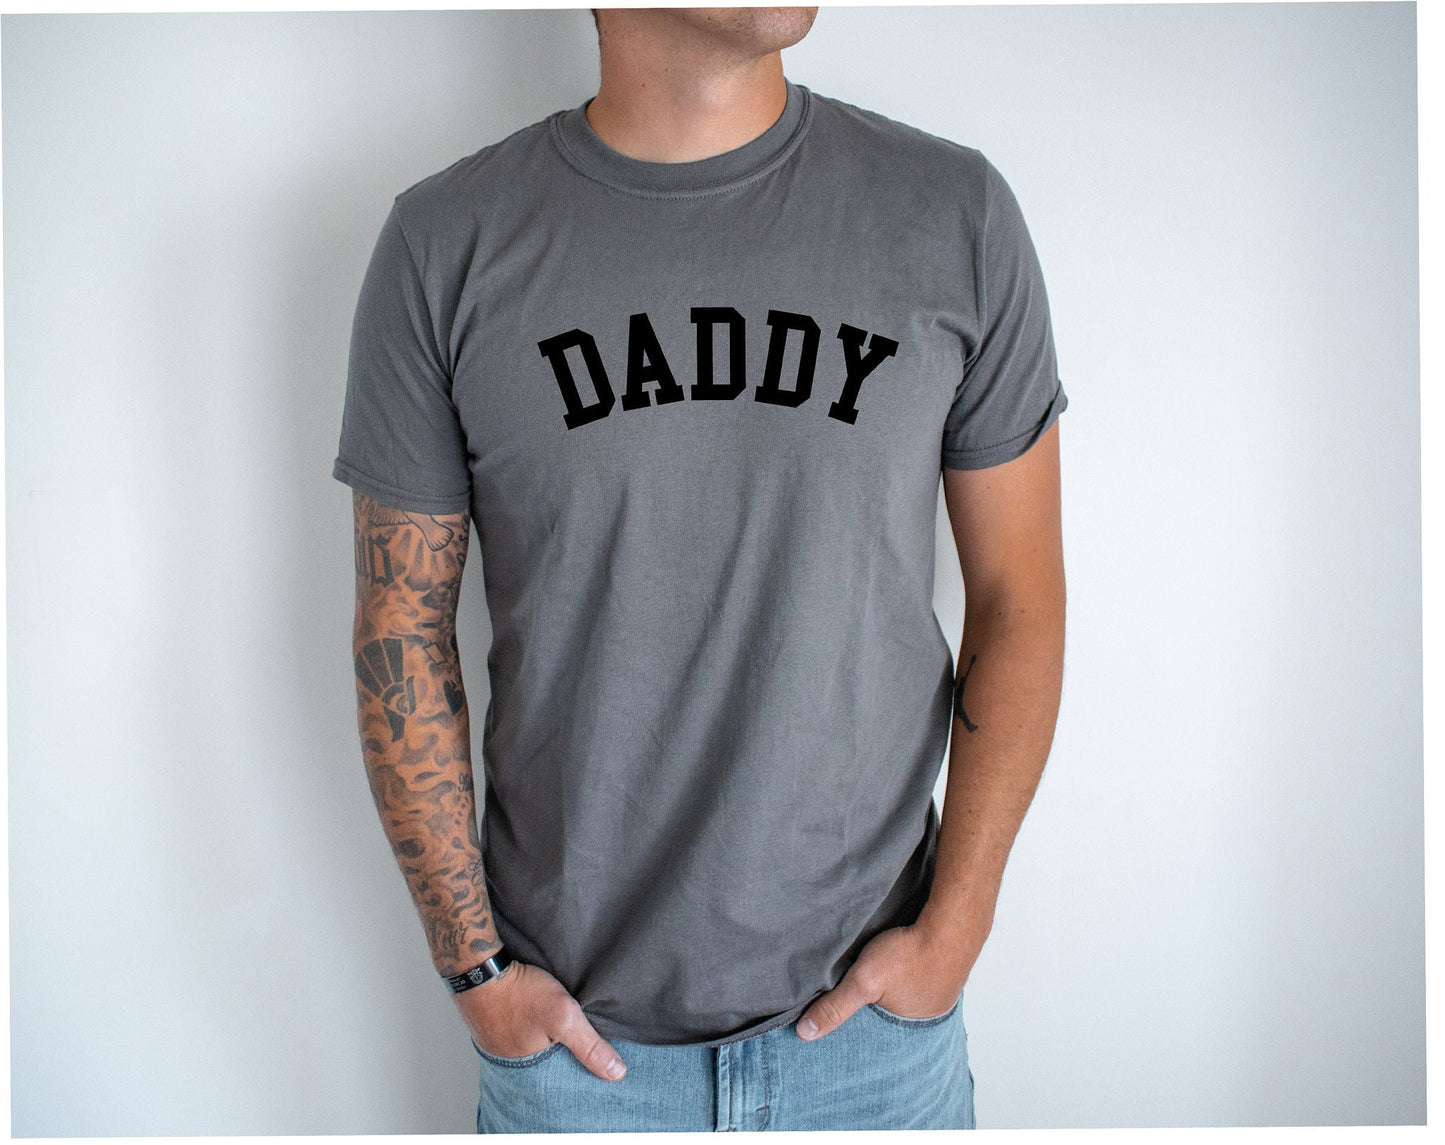 Daddy shirt, new dad gift, cute daddy tee, Funny gift for dad shirt, Father's day gift idea, pregnancy announcement shirt Daddy gift